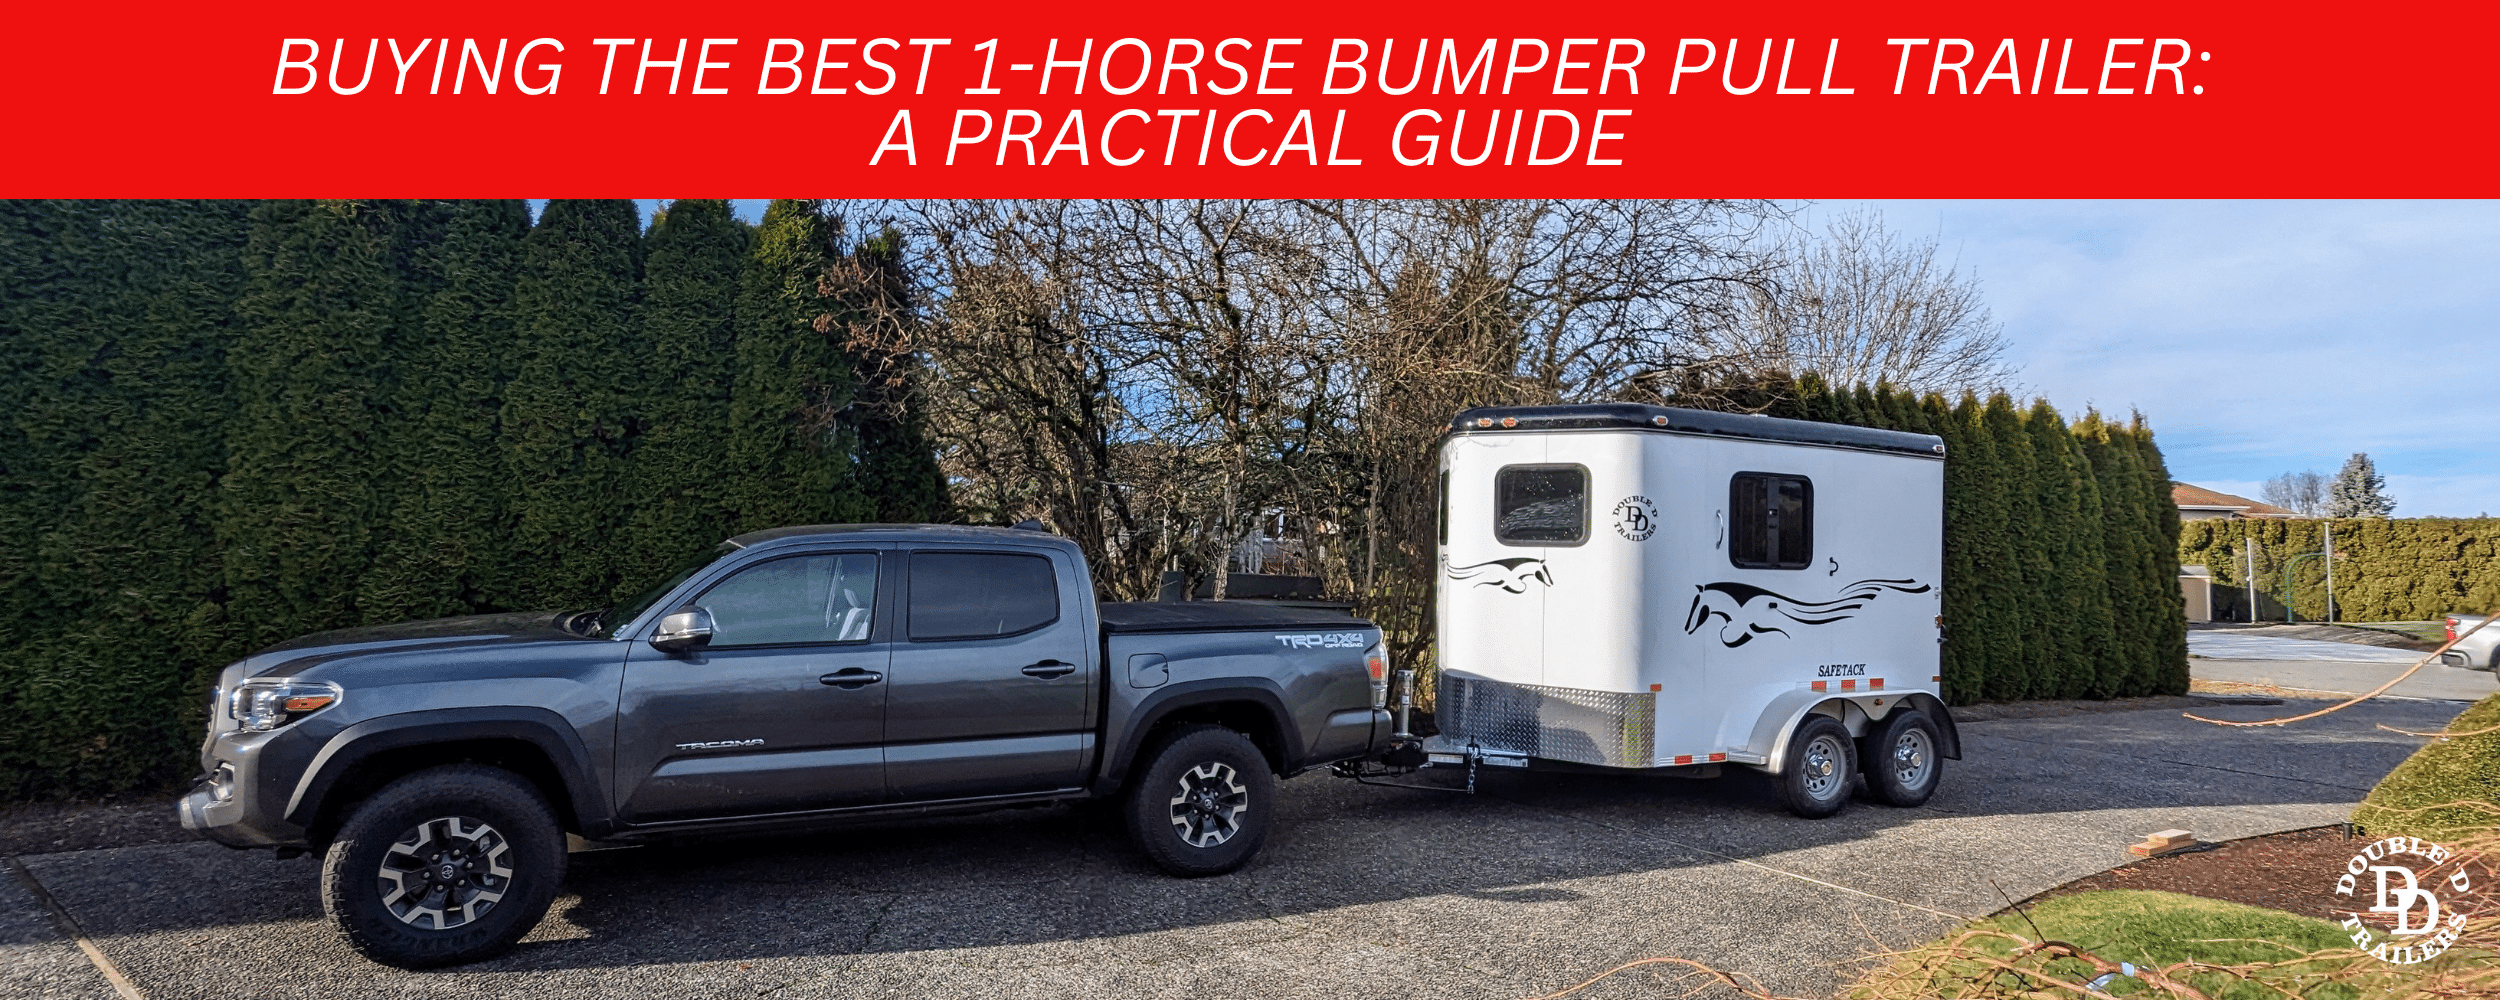 Buying the Best 1-Horse Bumper Pull Trailer: A Practical Guide by Double D Trailers